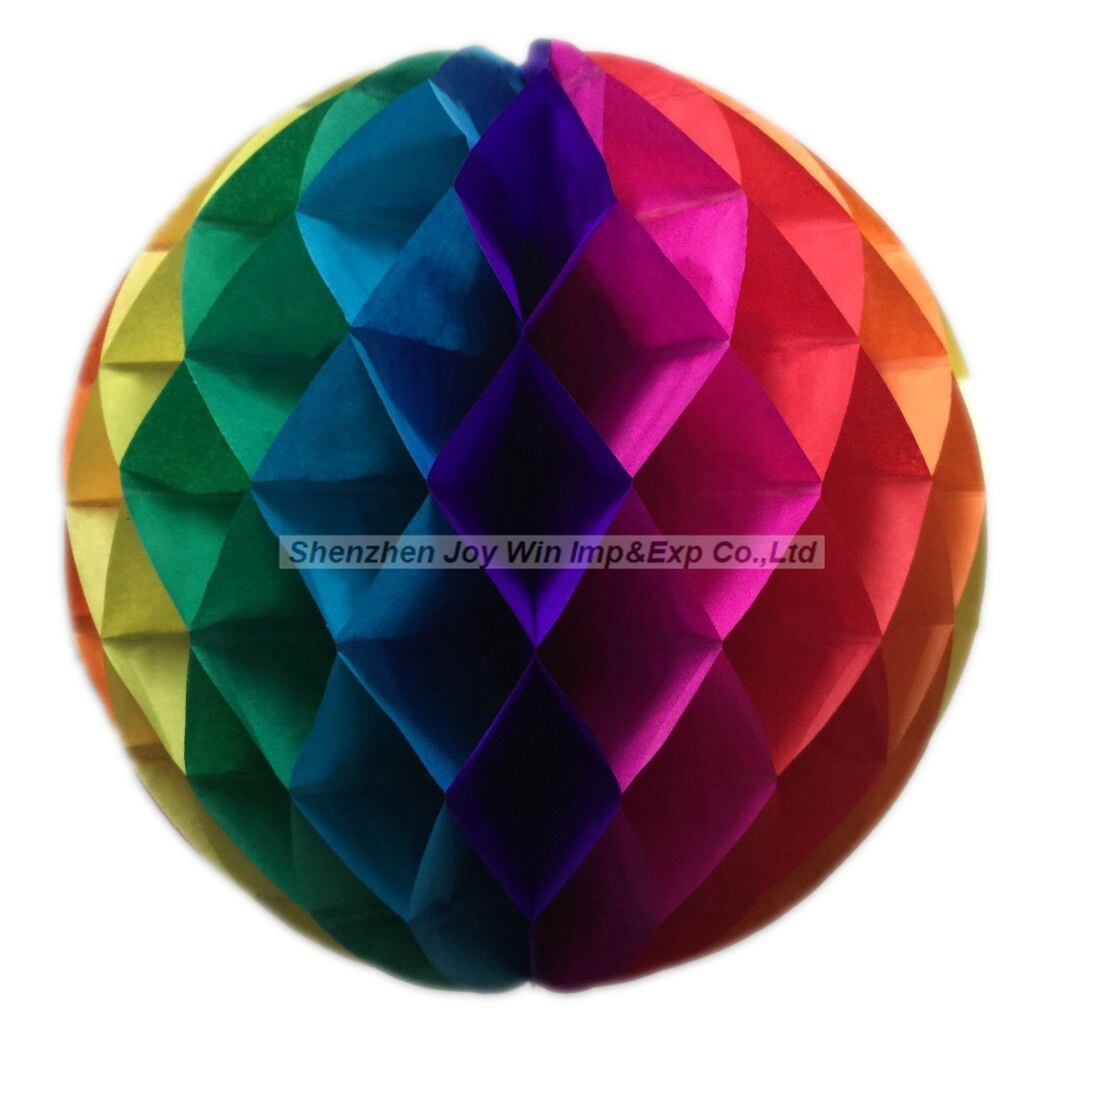 Promotional Colorful Honeycomb Ball Creative Paper Garlands